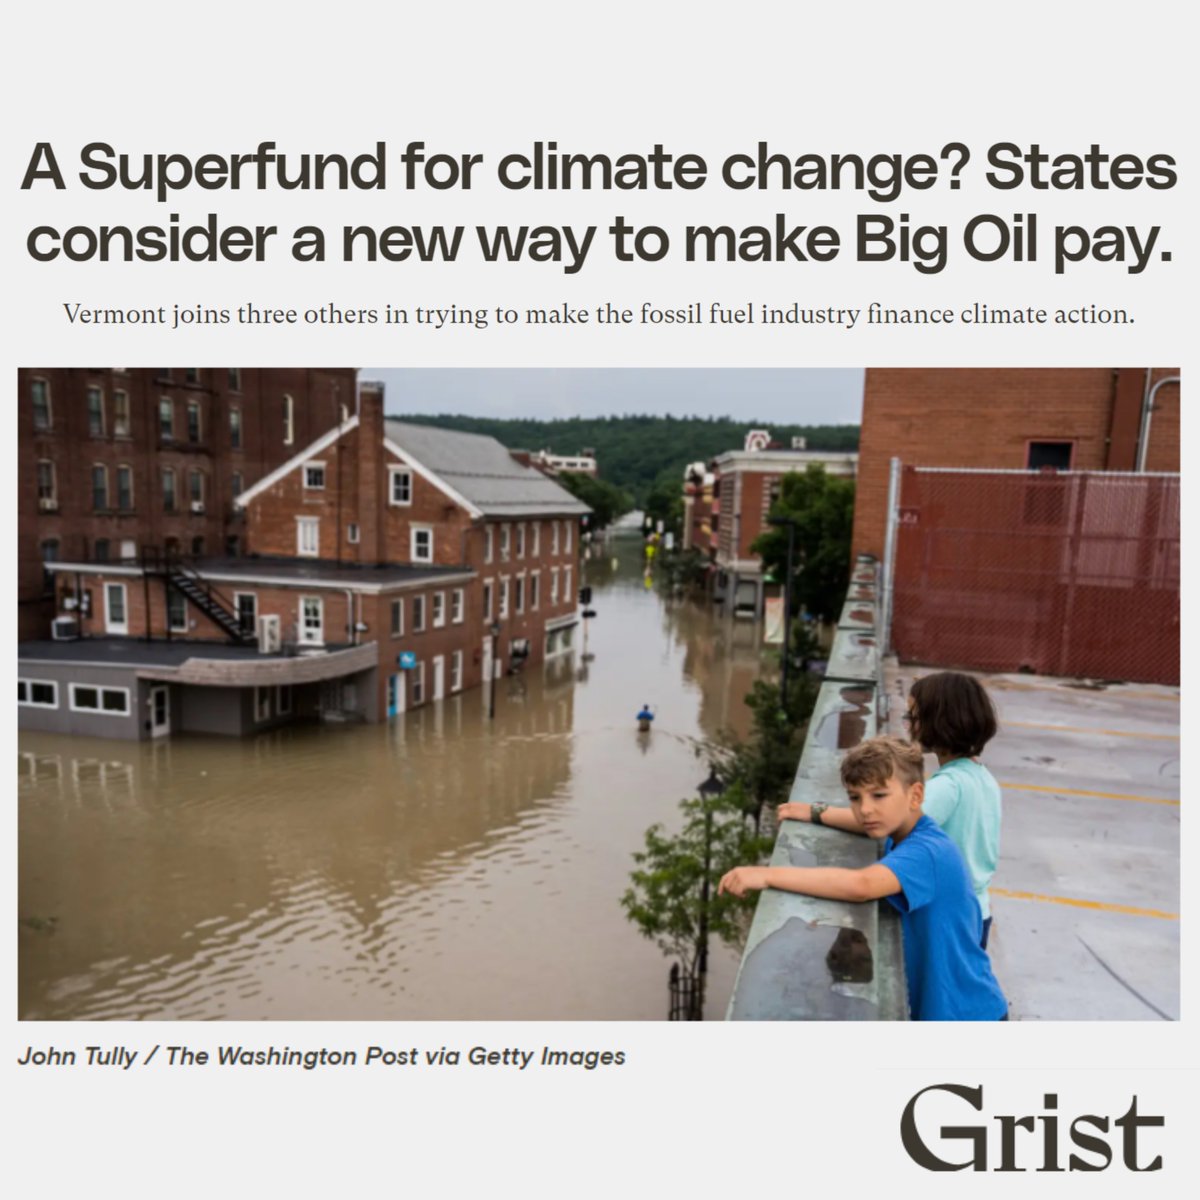 'As communities attempted to recover from the havoc, legislators in these states, and several others, asked themselves why taxpayers should have to cover the cost of rebuilding after climate disasters when the fossil fuel industry is at fault.'

Read more: grist.org/accountability…